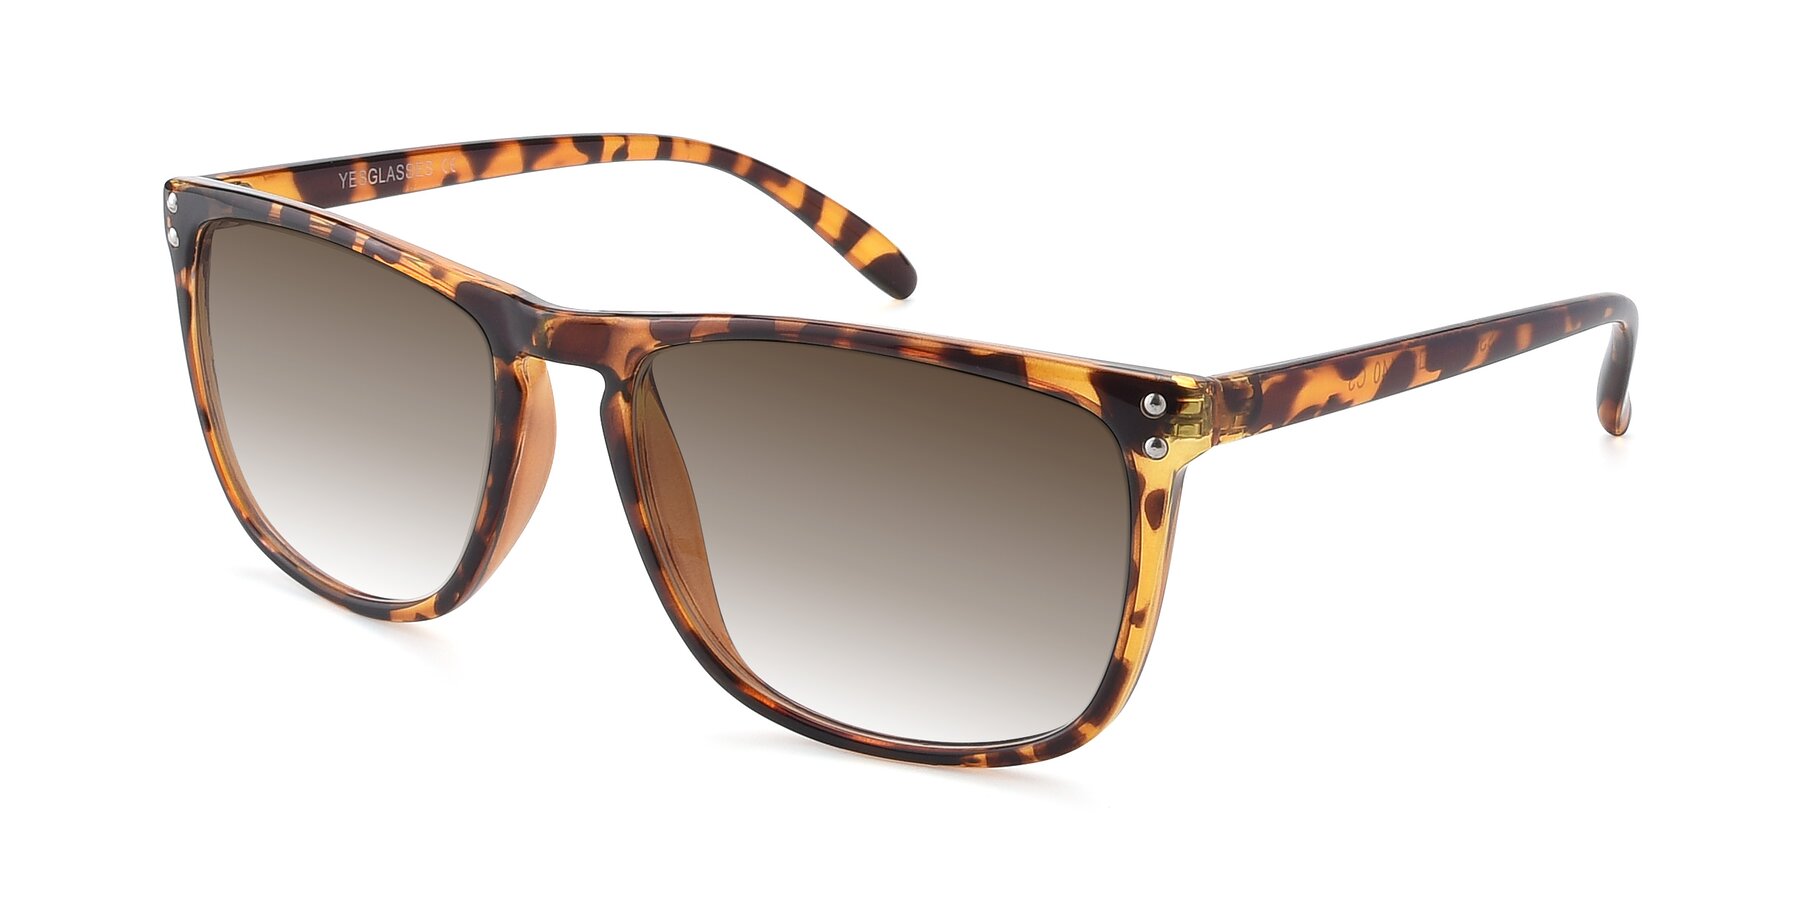 Angle of SSR411 in Translucent Orange Tortoise with Brown Gradient Lenses